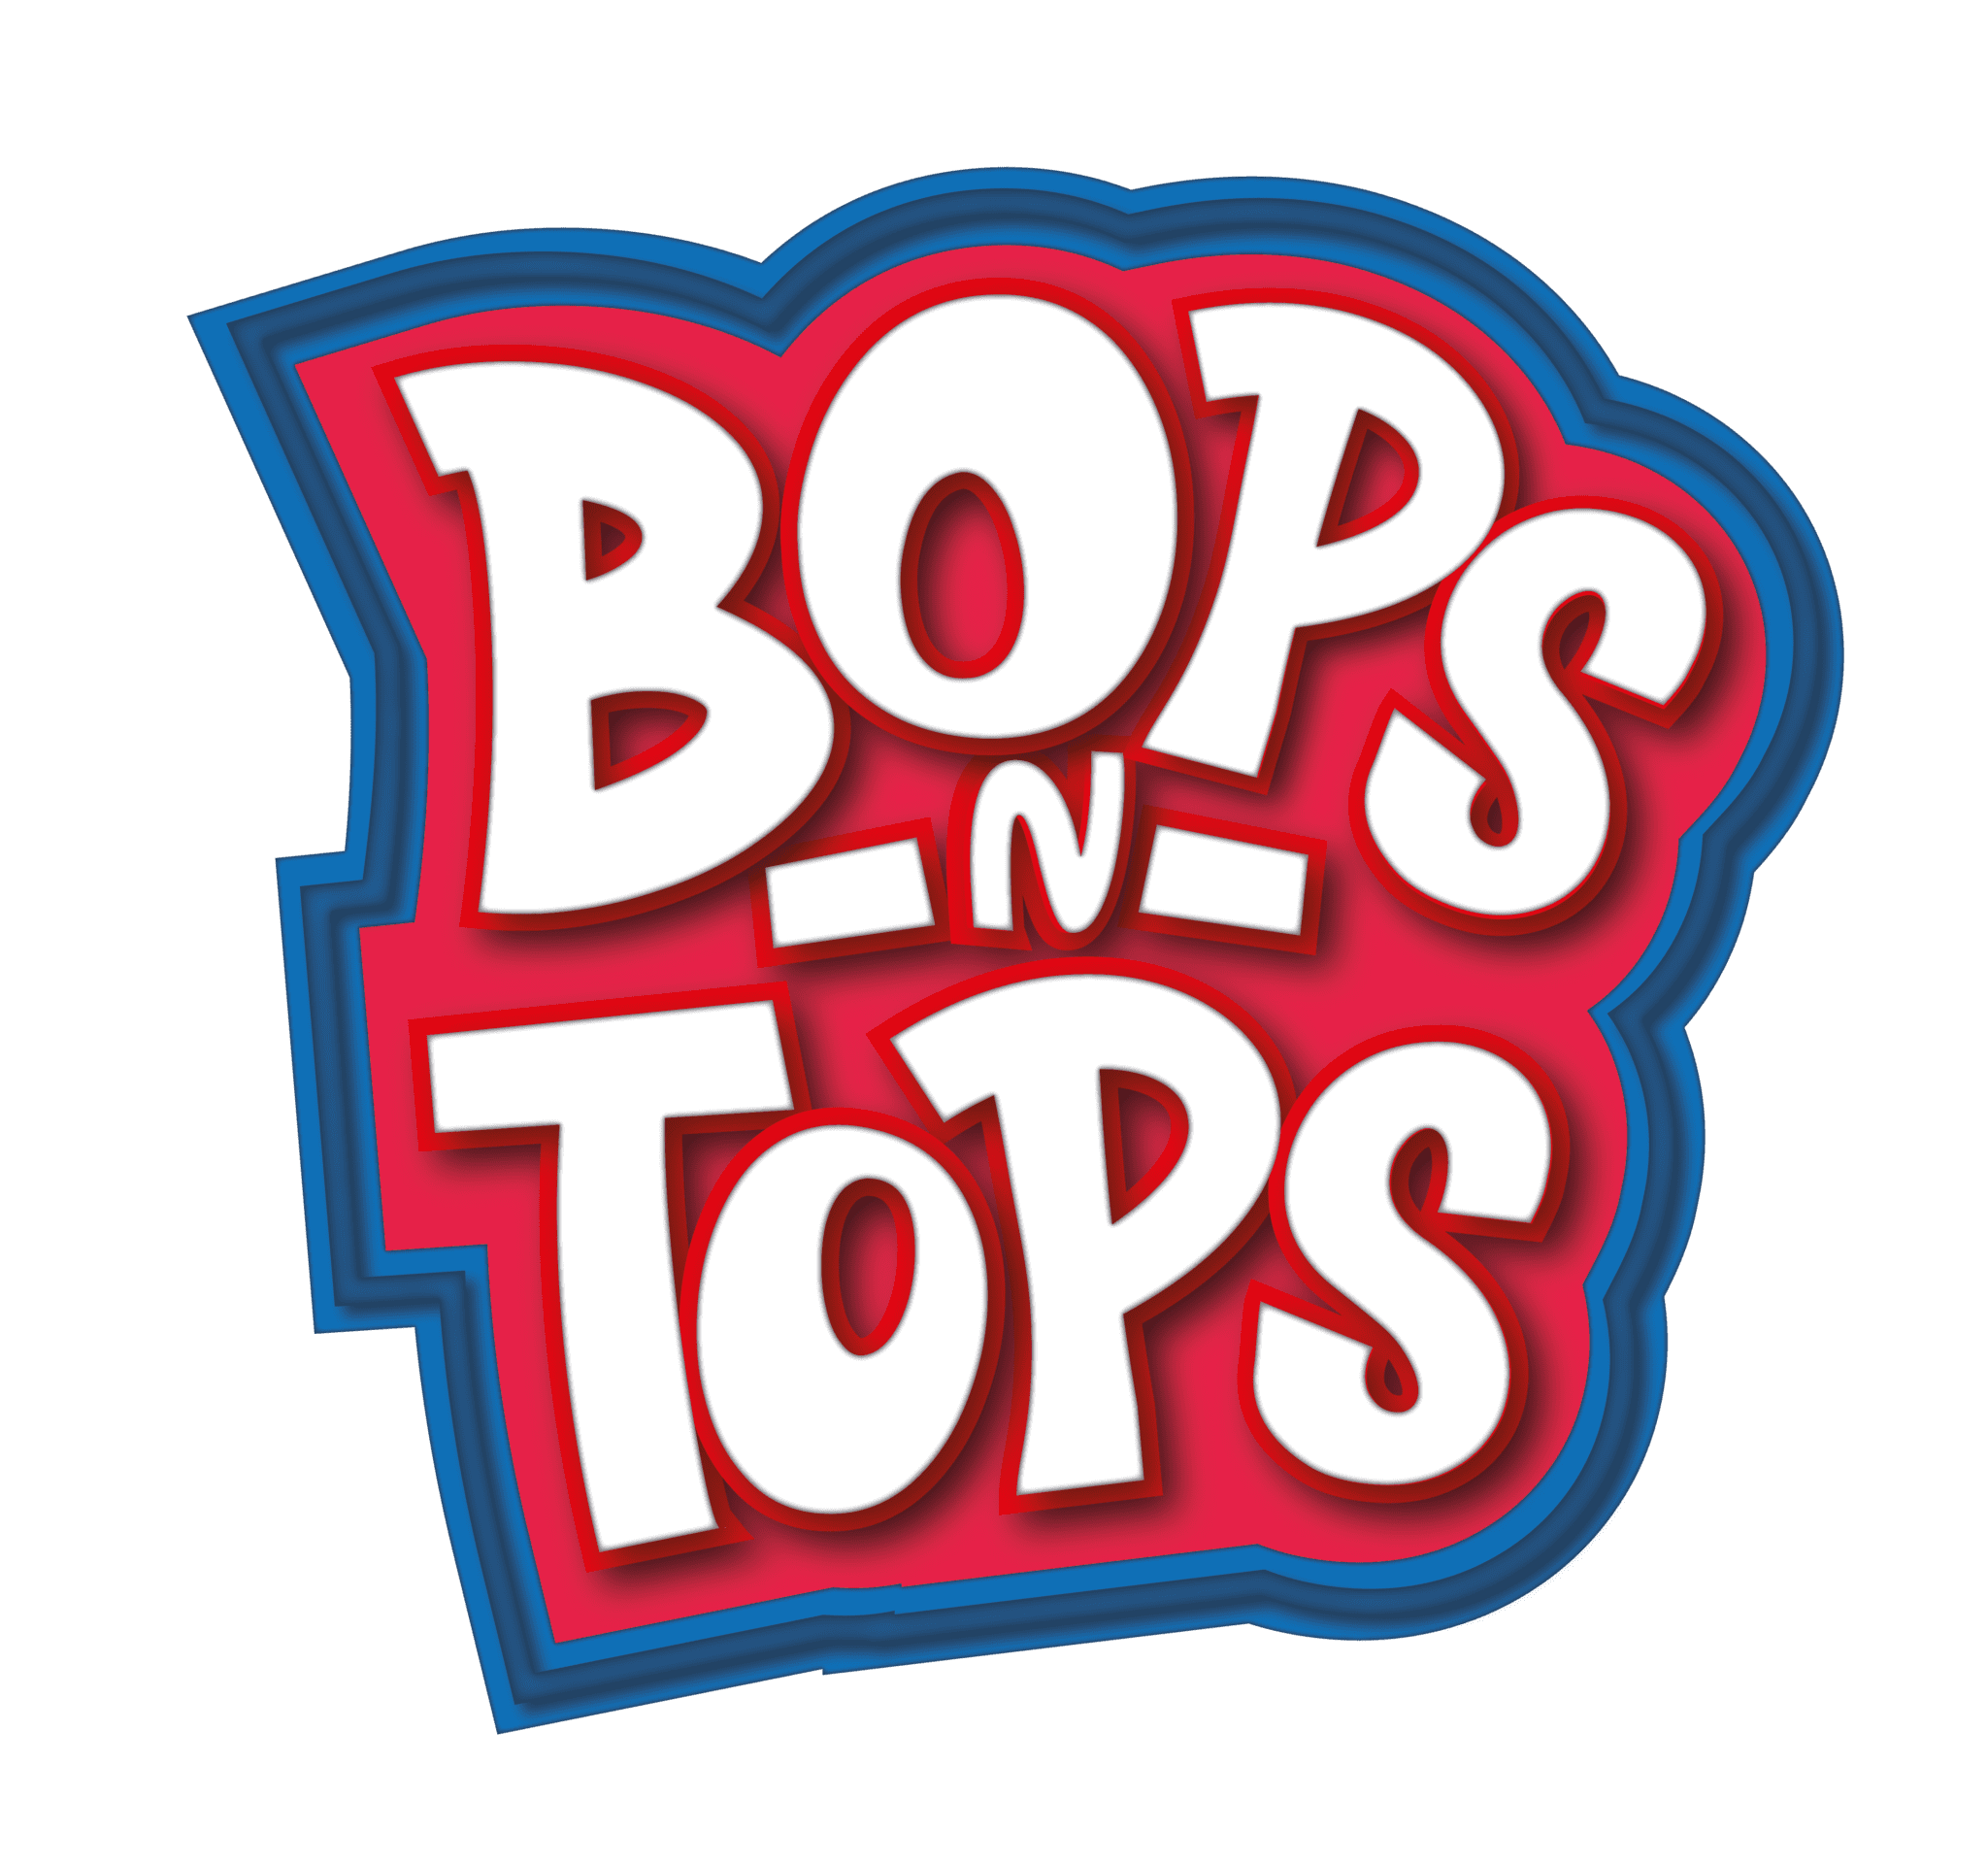 This is an image of the Bops n Tops logo.